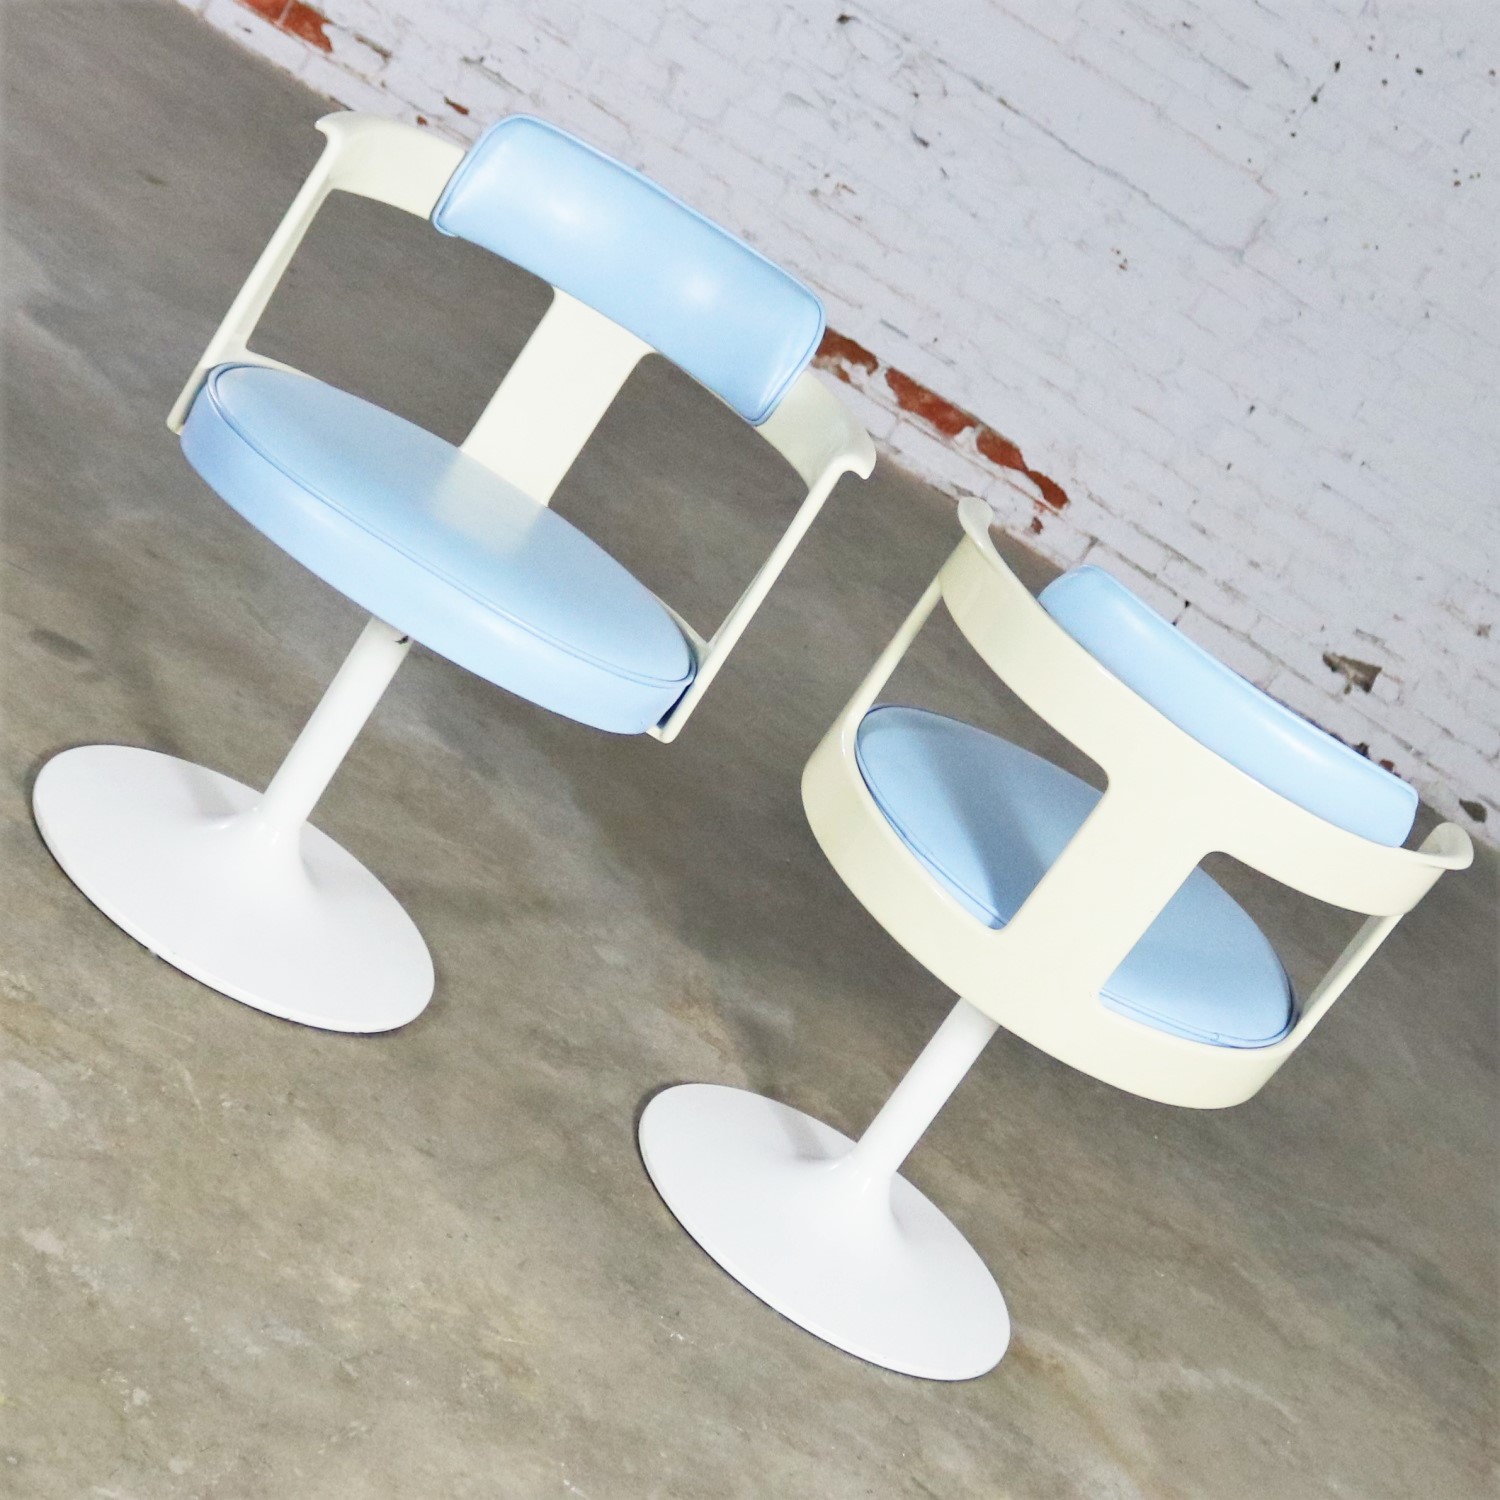 Daystrom Furniture Tulip Style Swivel Chairs in Baby Blue and White